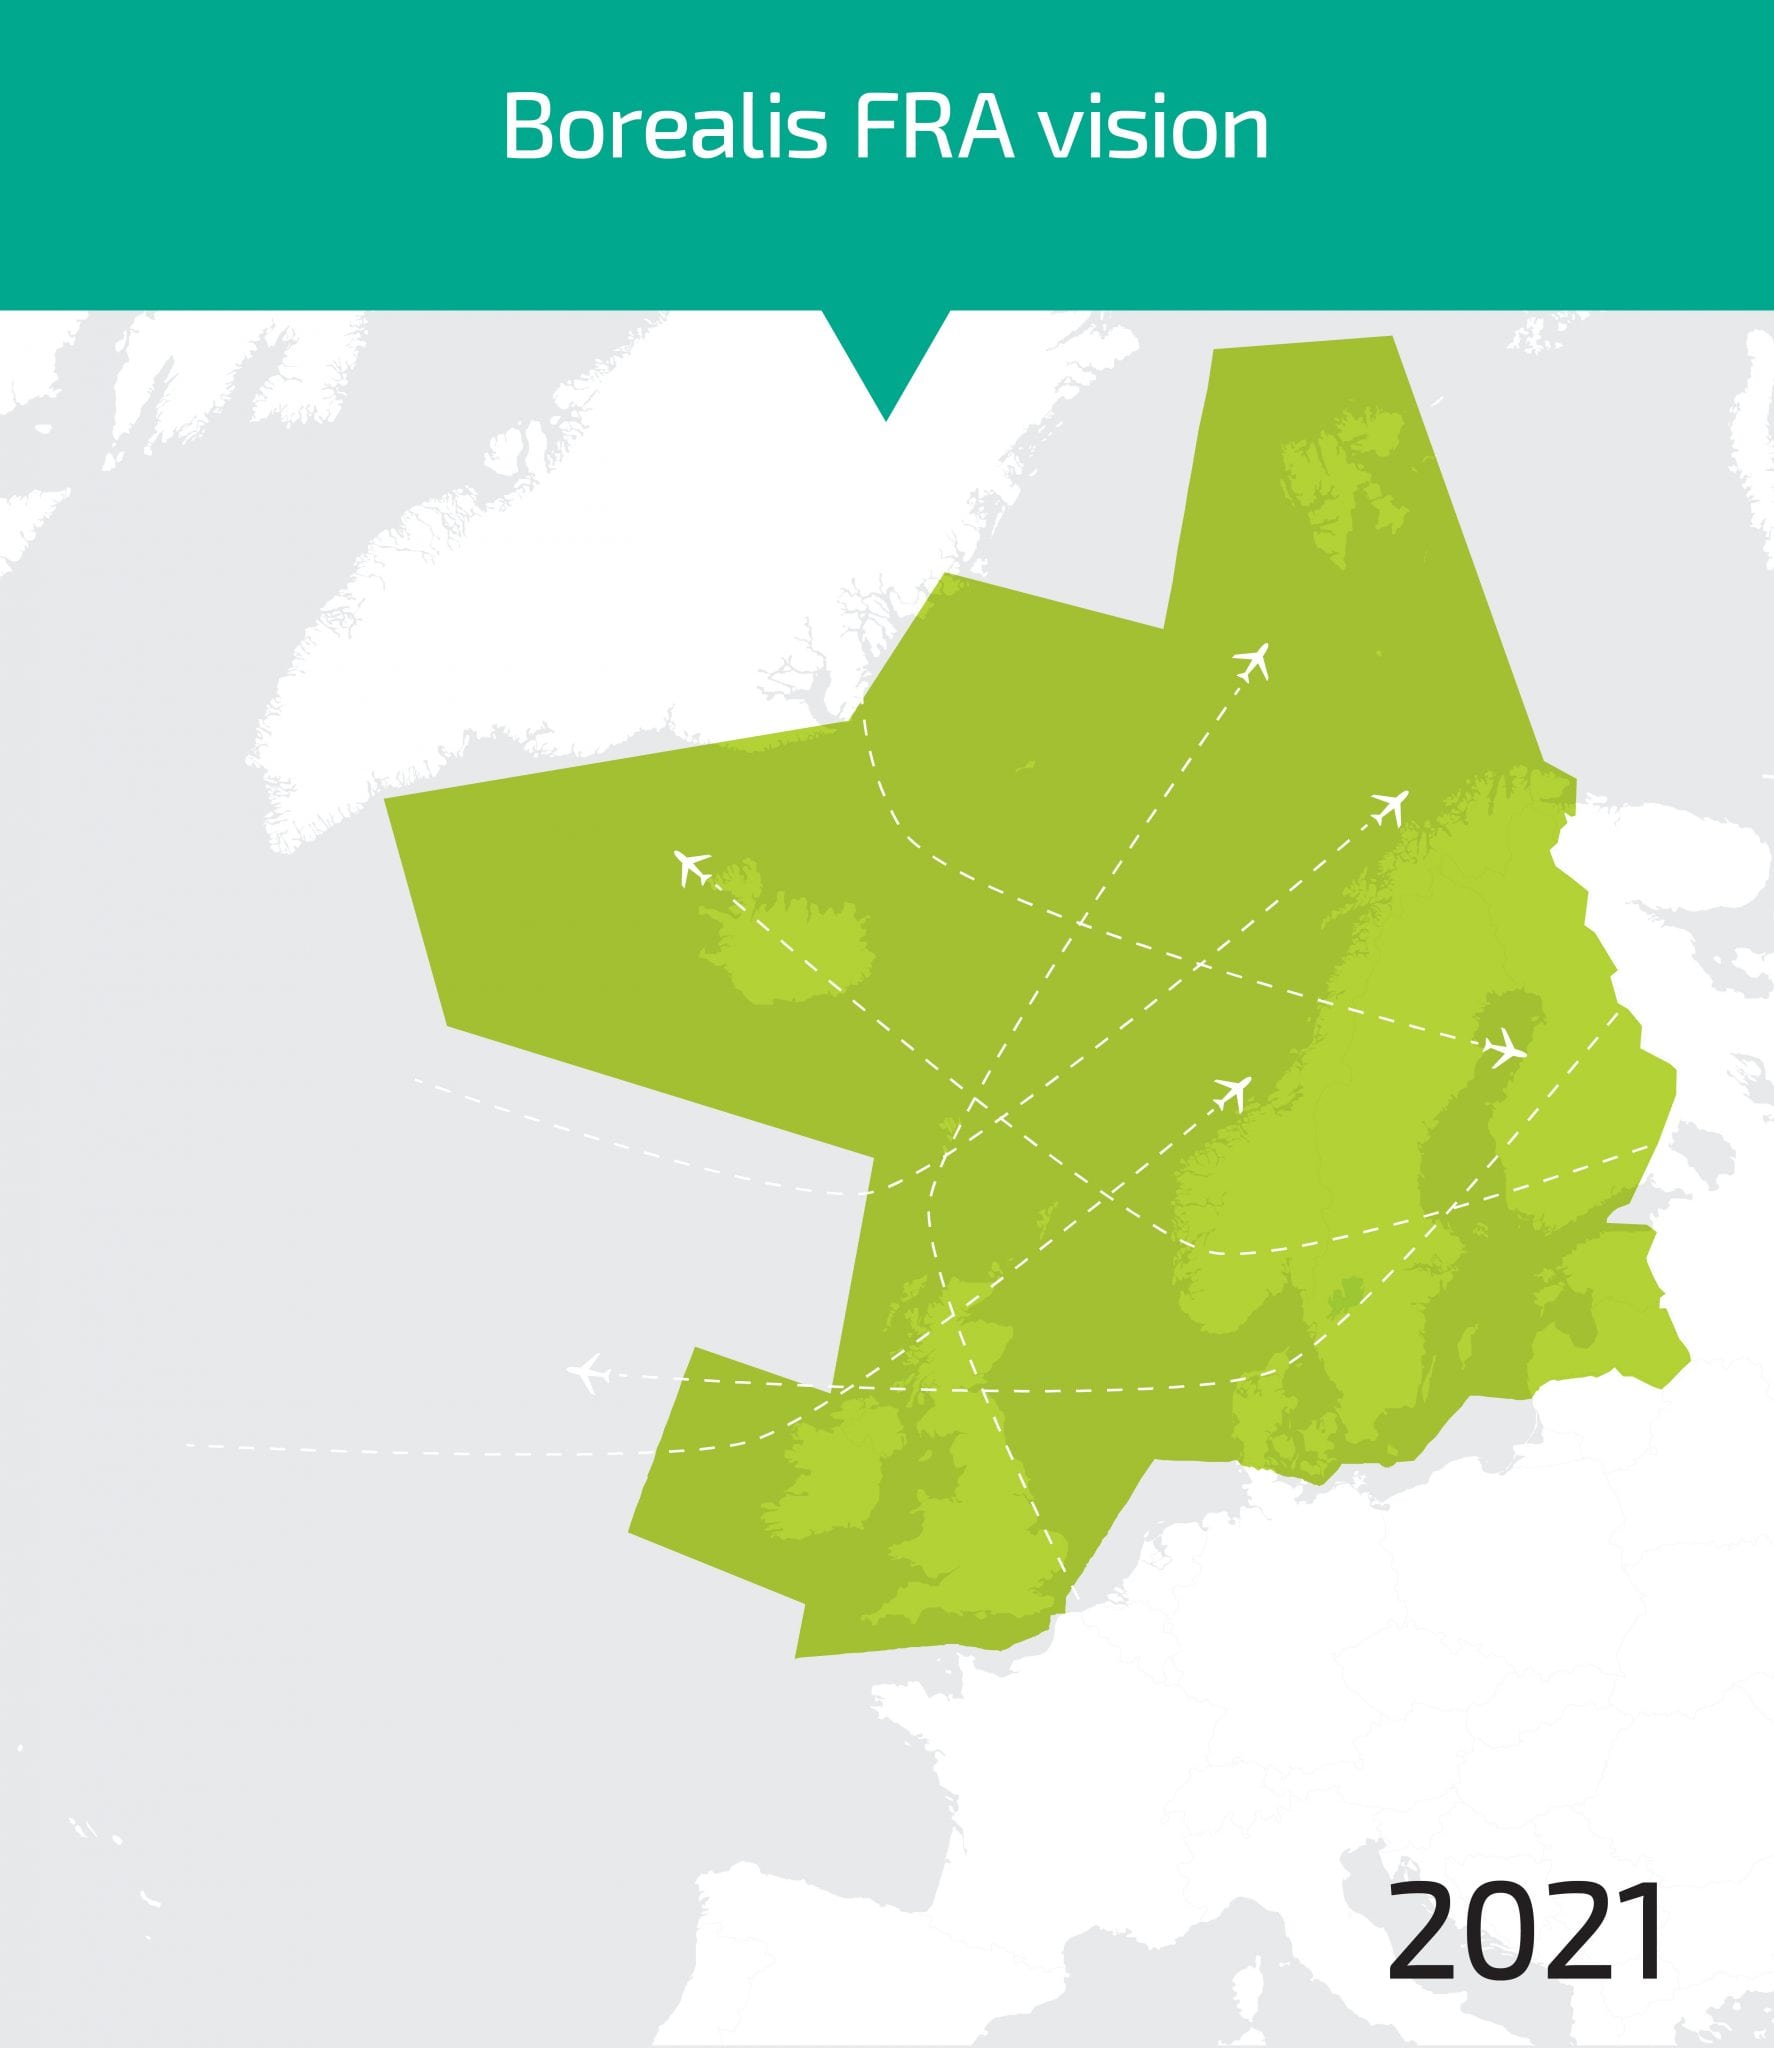 The Borealis Alliance’s vision for free route airspace in 2021